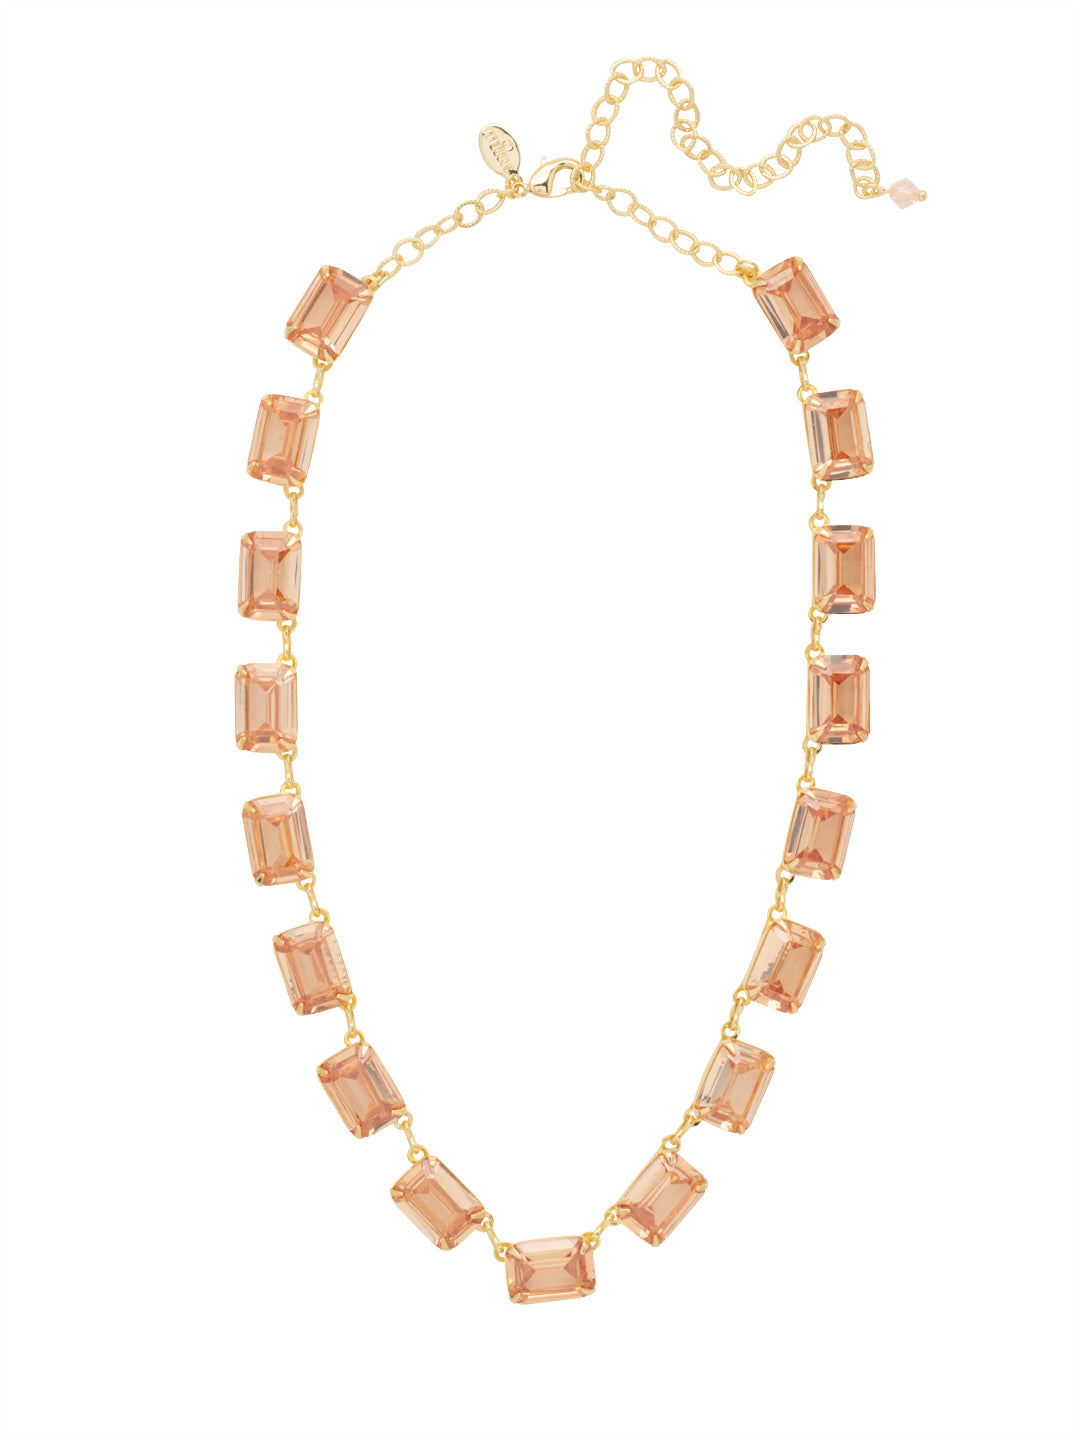 Julianna Mini Emerald Cut Statement Necklace - NFD78BGRSU - <p>The Julianna Mini Cut Statement Necklace features a row of emerald cut candy drop crystals around an adjustable chain, secured with a lobster claw clasp. From Sorrelli's Raw Sugar collection in our Bright Gold-tone finish.</p>